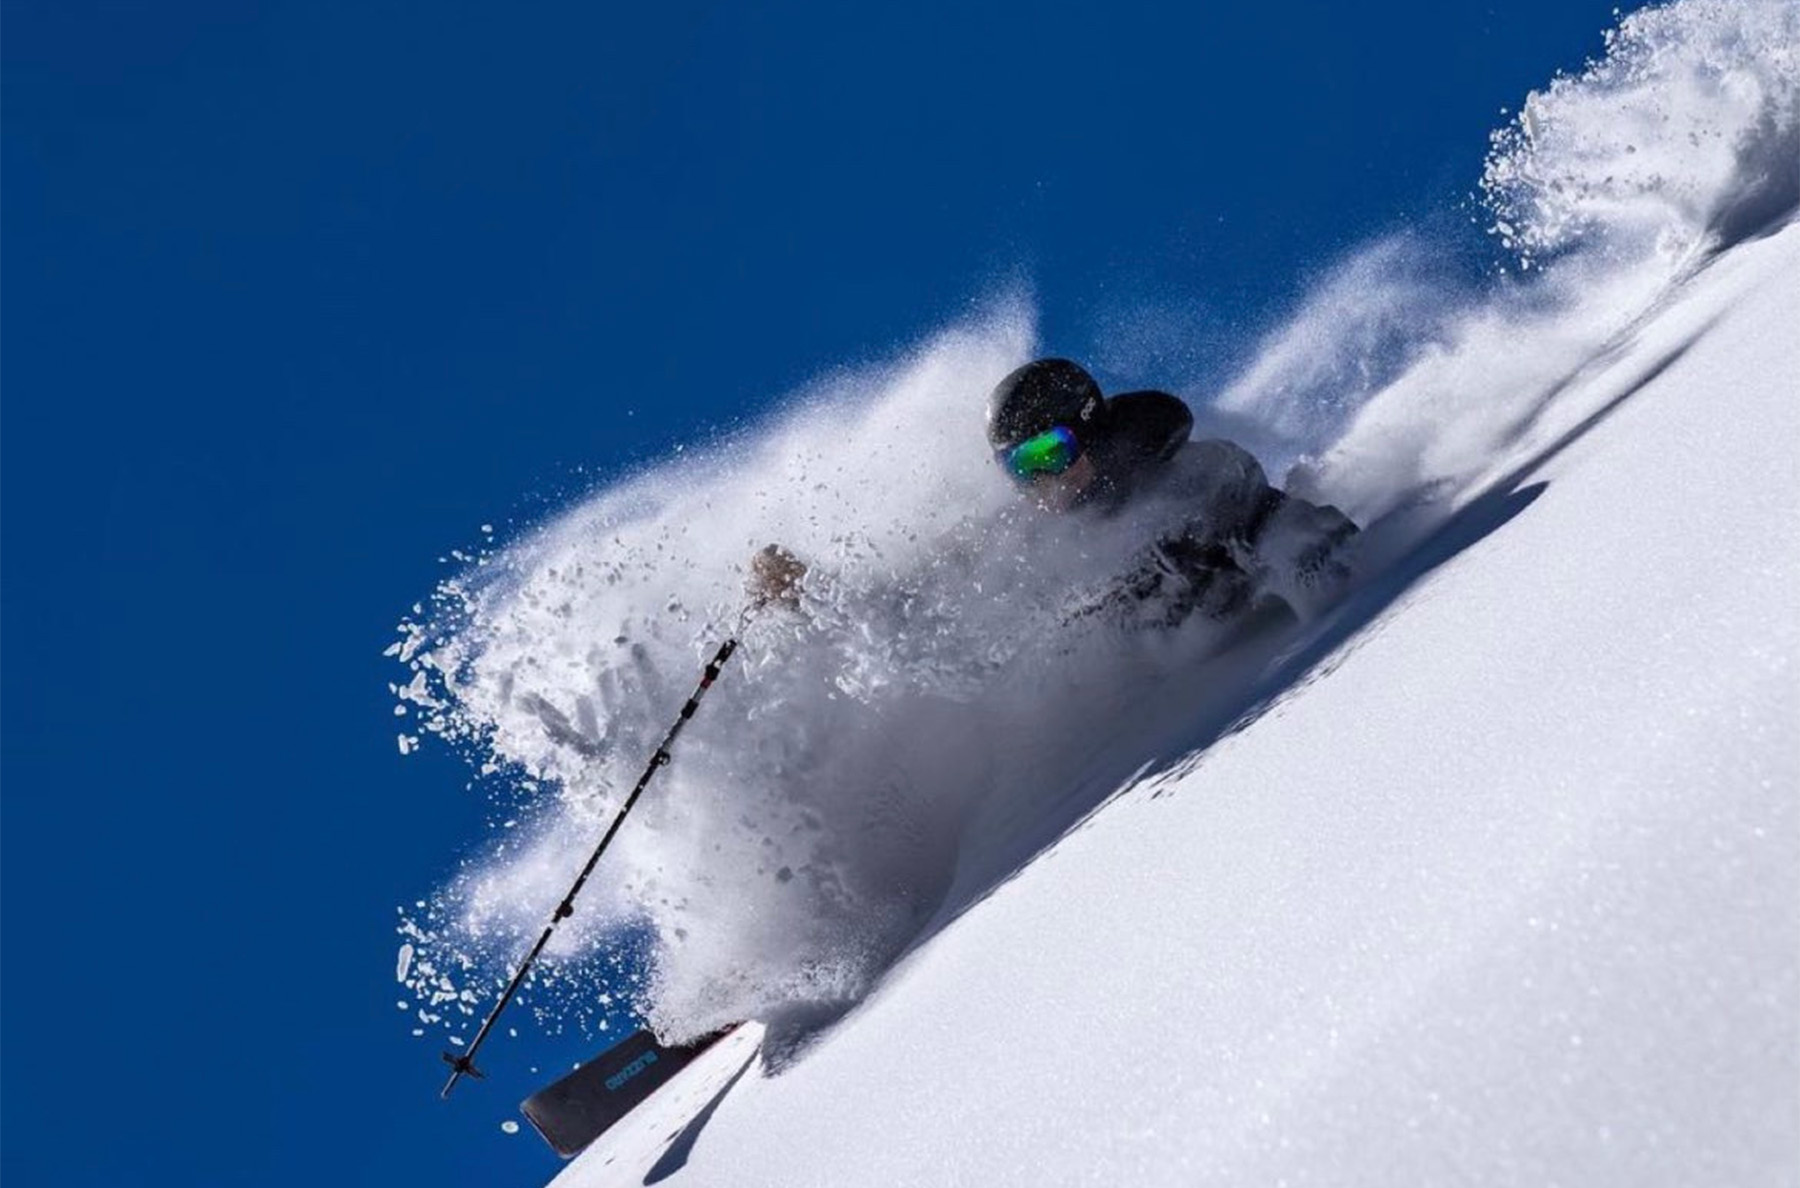 On Blister's GEAR:30 podcast, We talk with Blizzard’s Christian Avery about the overhauled Rustler & Sheeva skis; where their Hustle line of skis slots into the mix; and why nobody should be sleeping on the Cochise.